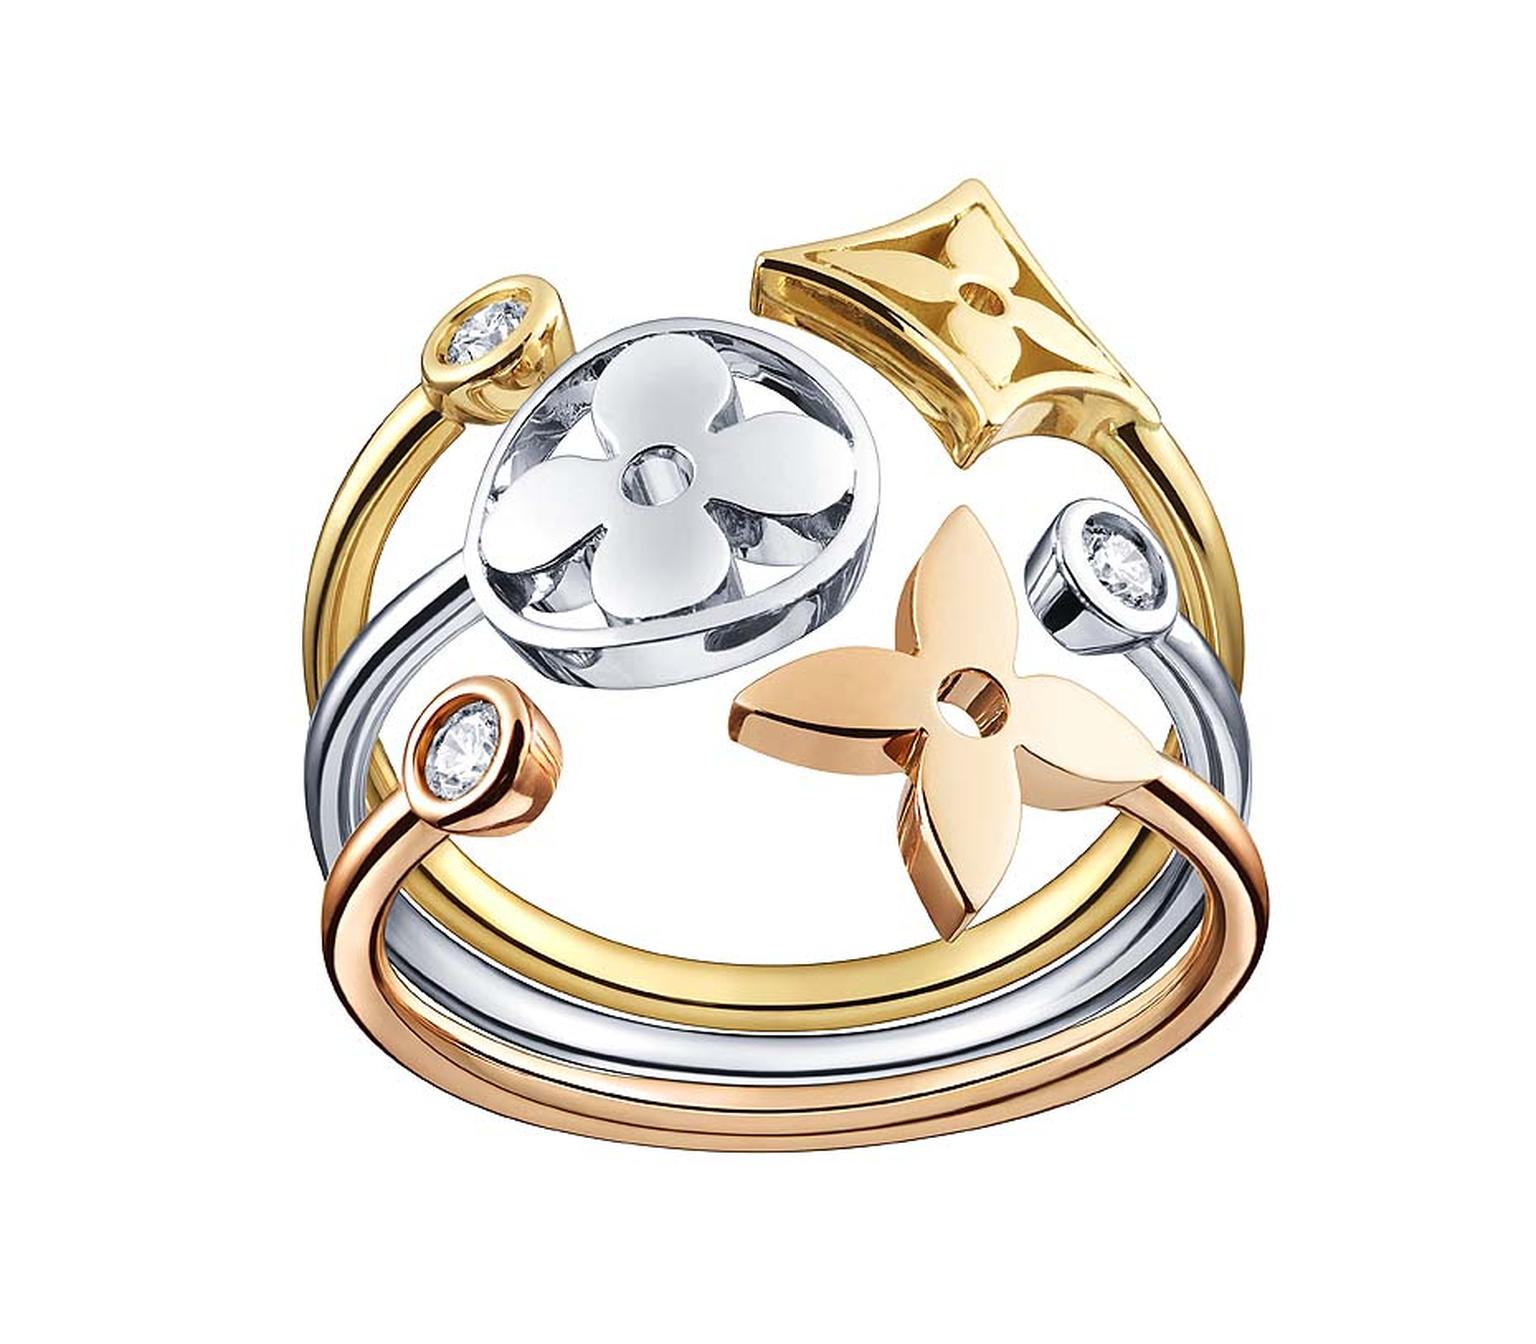 This stackable Louis Vuitton ring in white, yellow and pink